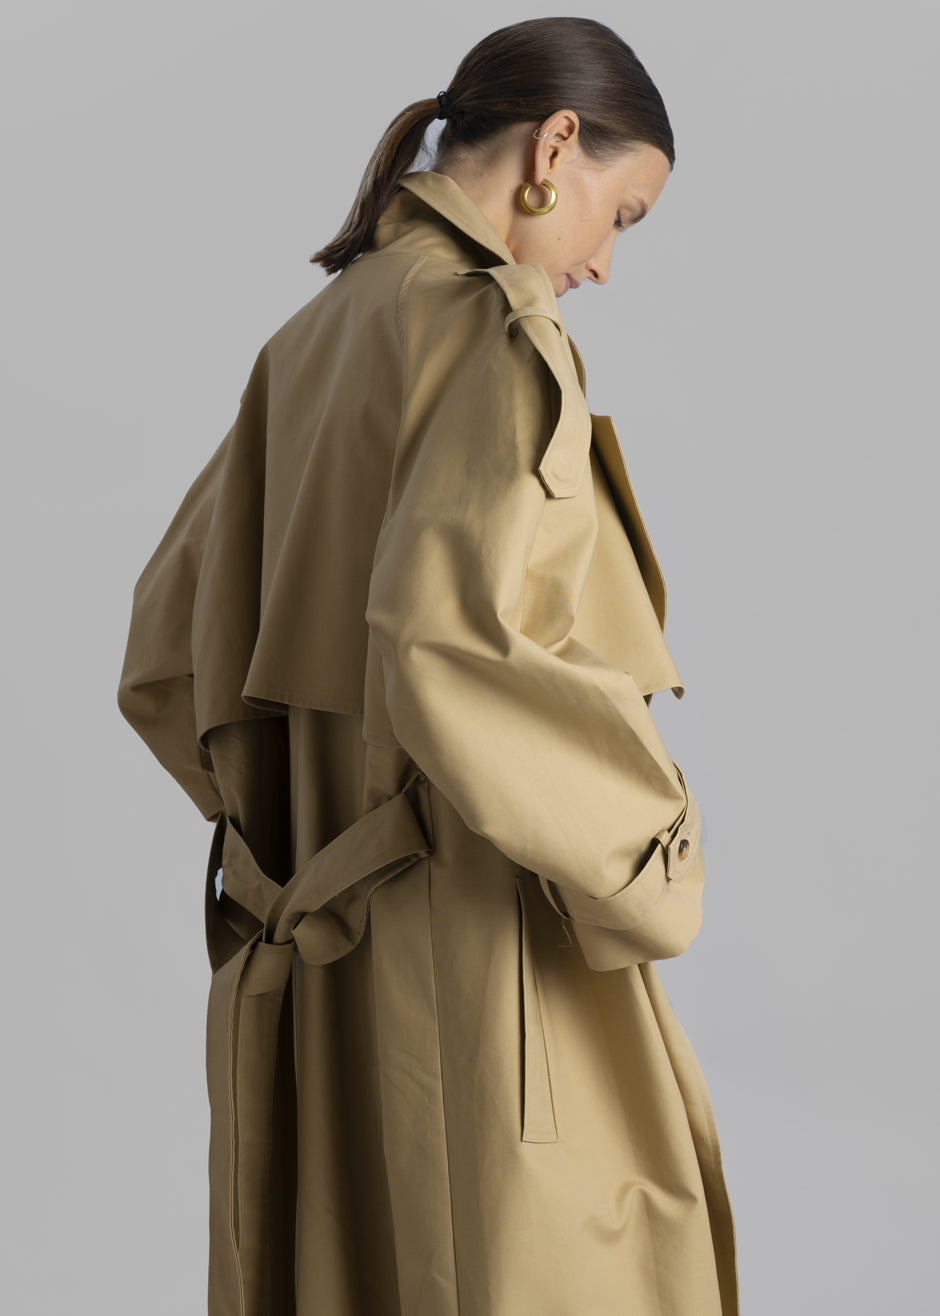 Suzanne Trench Coat - Beige - 2